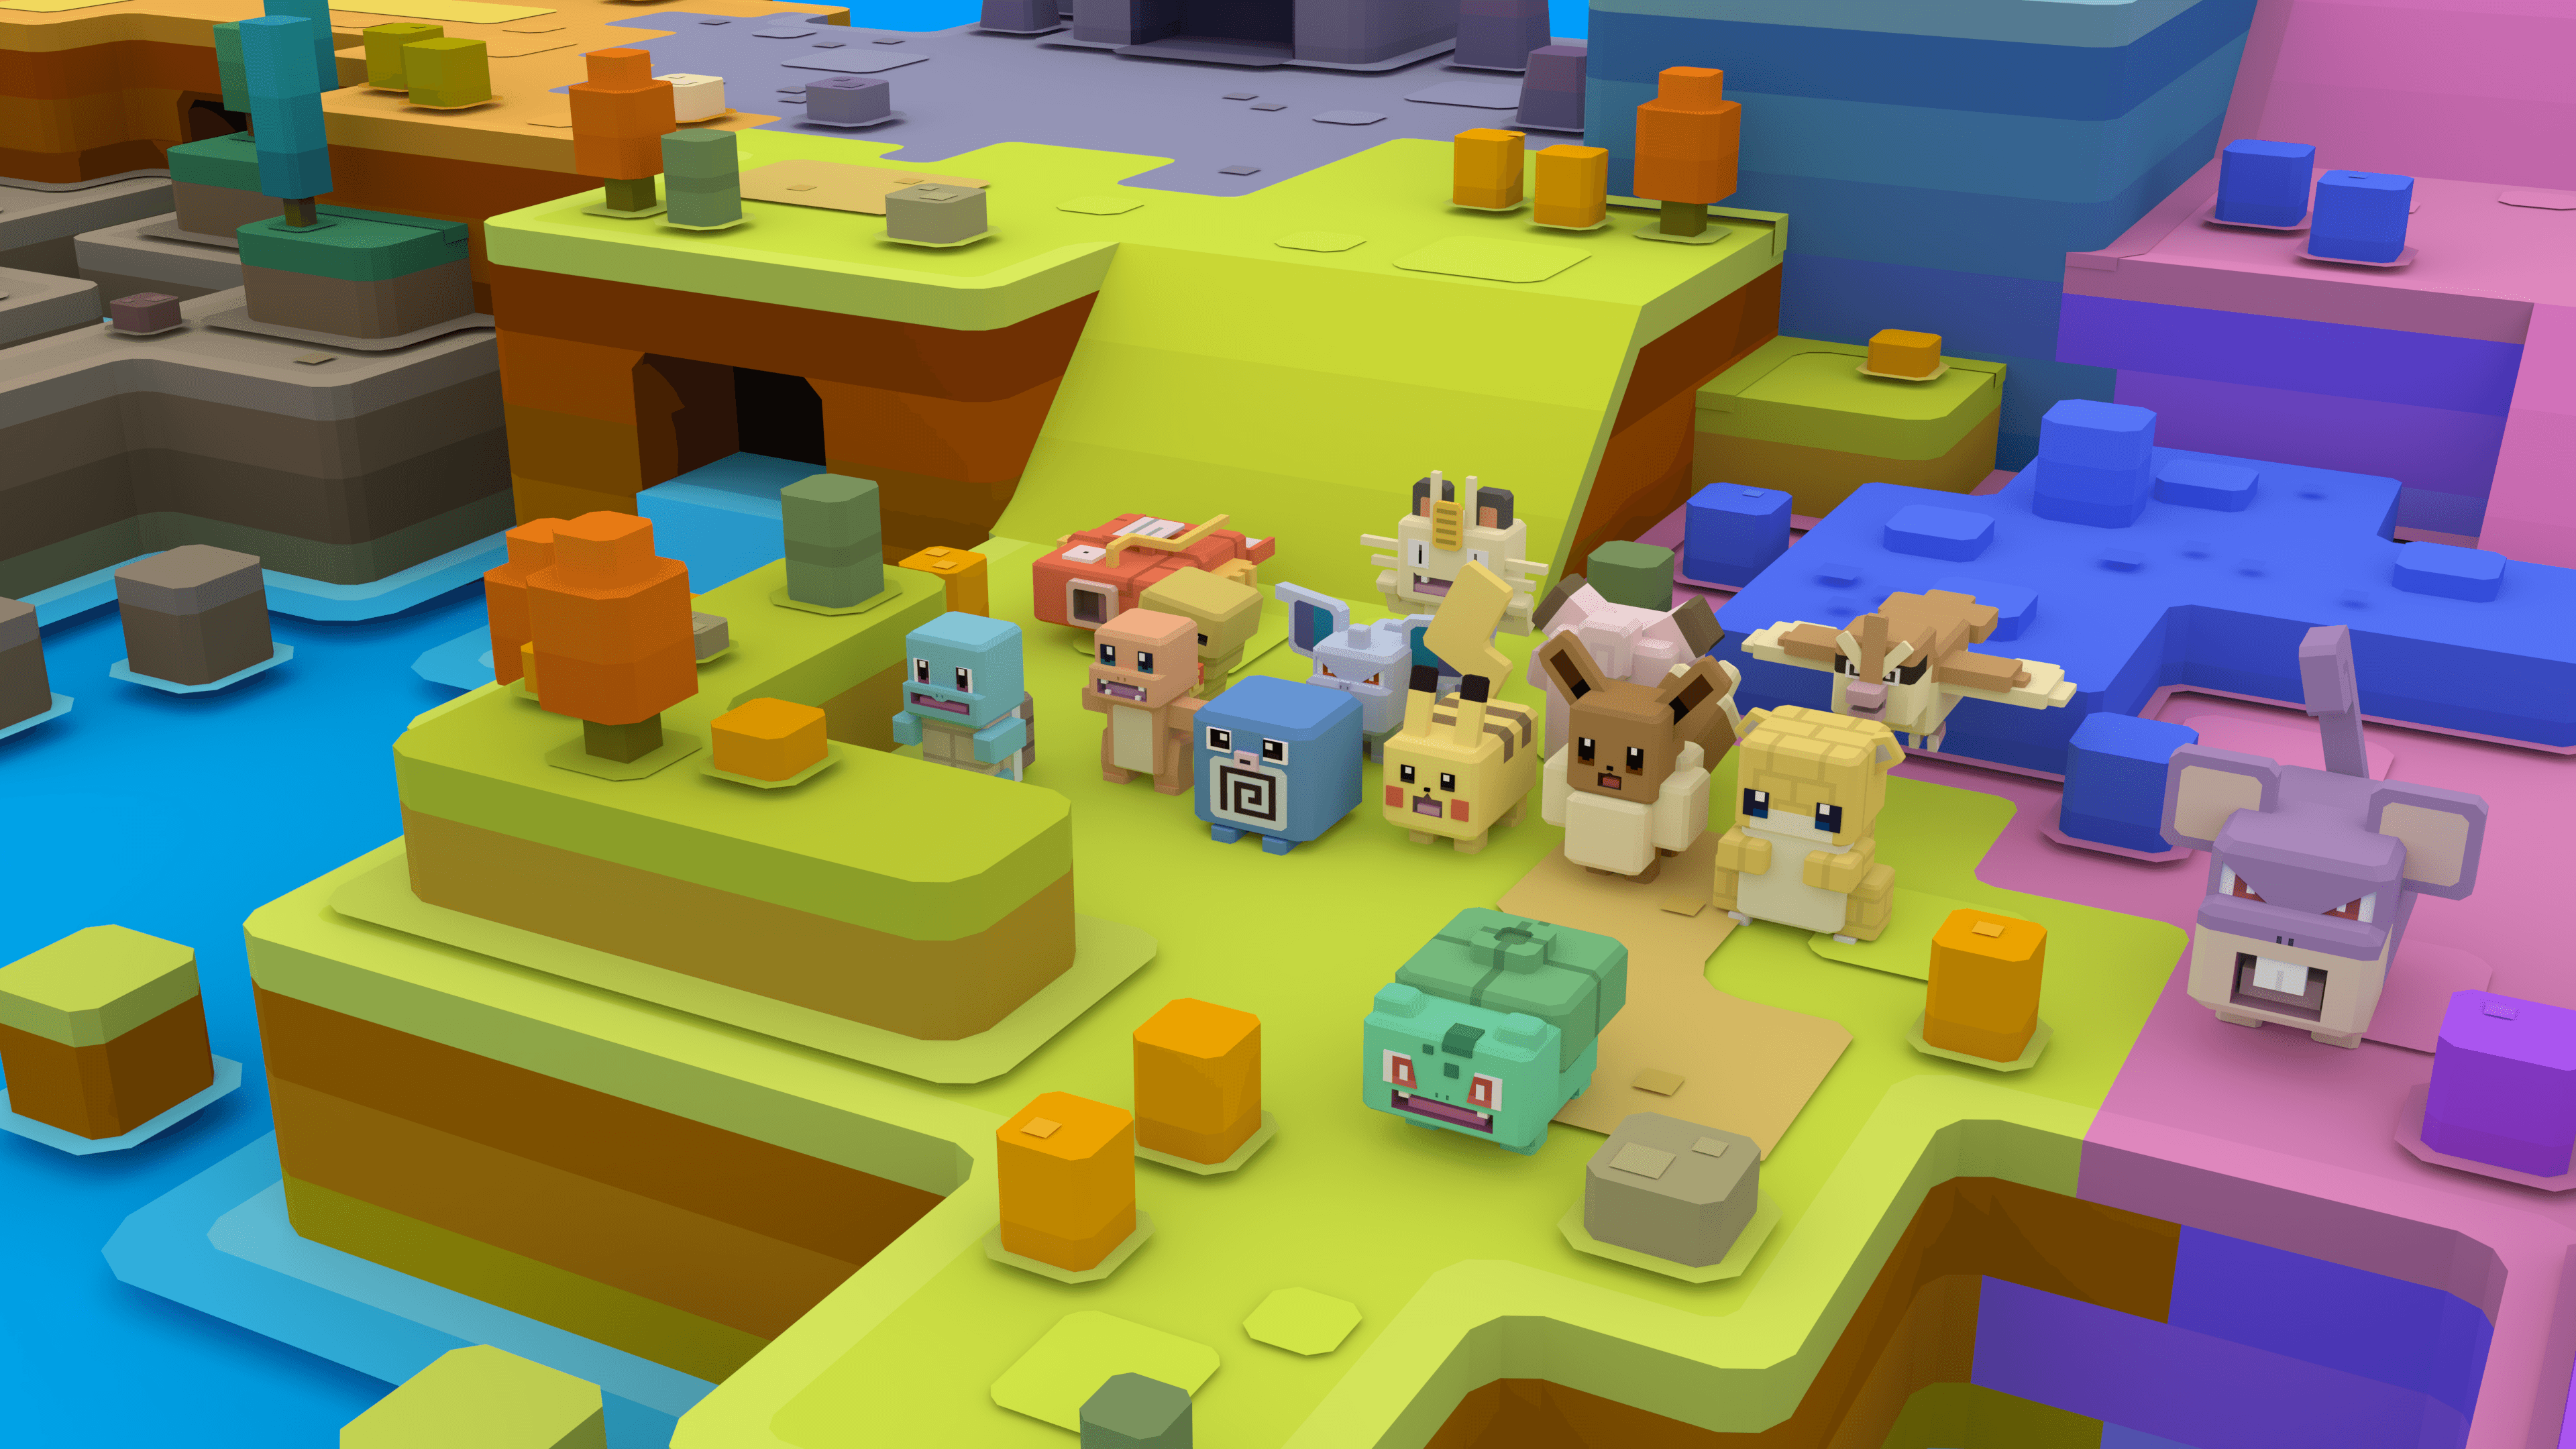 4K colorful wallpaper rendered from ripped Pokémon Quest assets